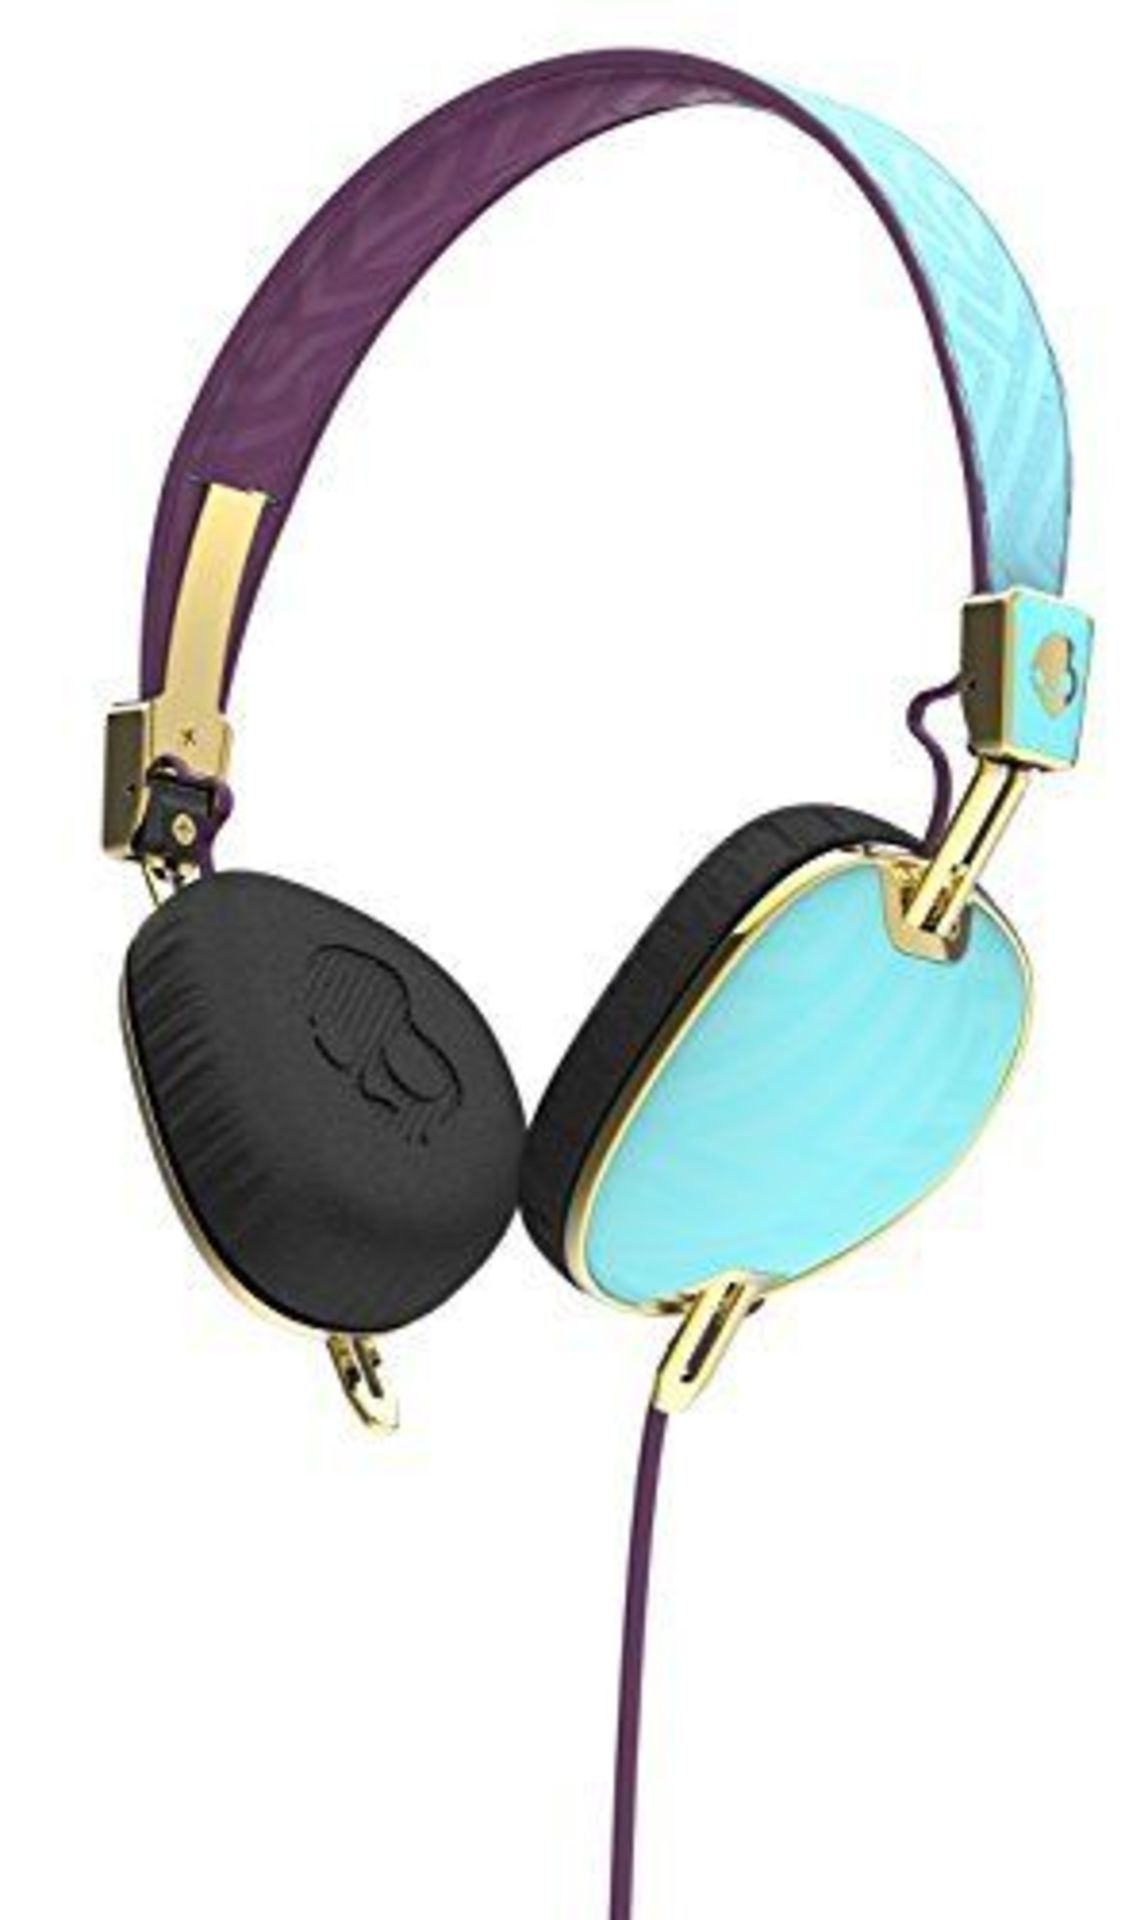 + VAT Brand New Skullcandy Knockout On-Ear Headphones with Three Button Mic/Controller - Robin/